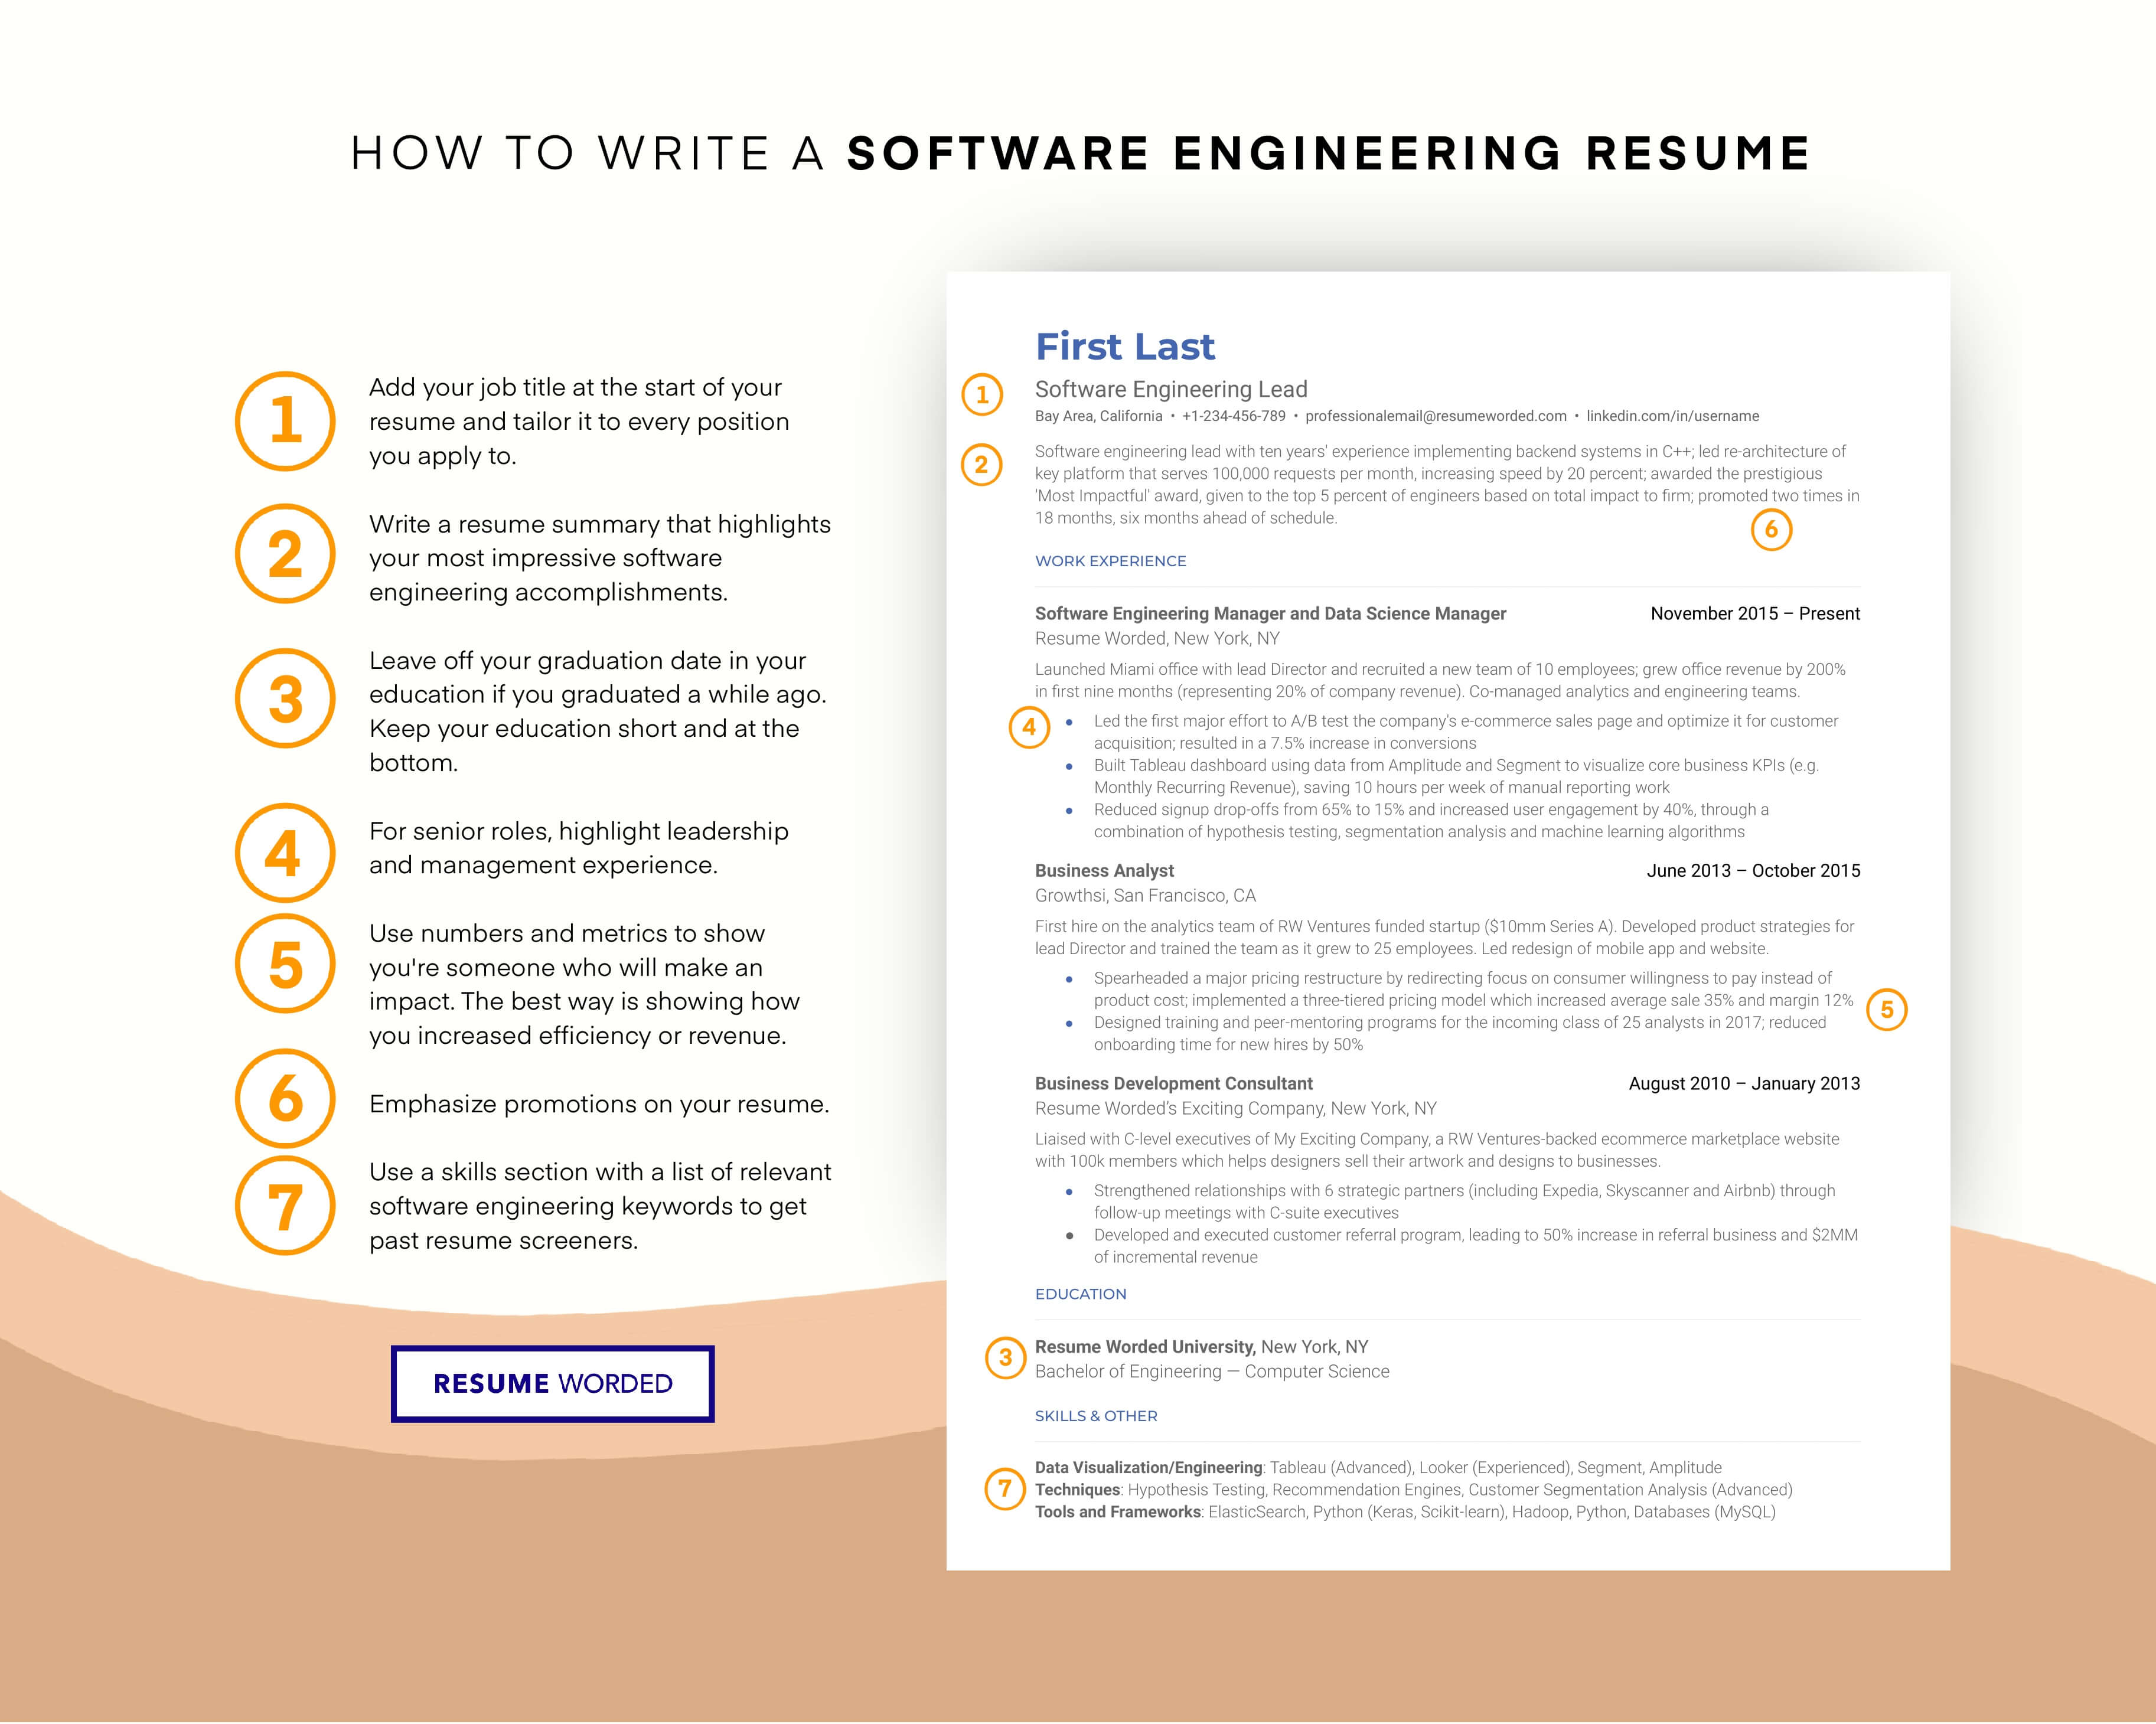 List relevant software and tools - Game Design Resume